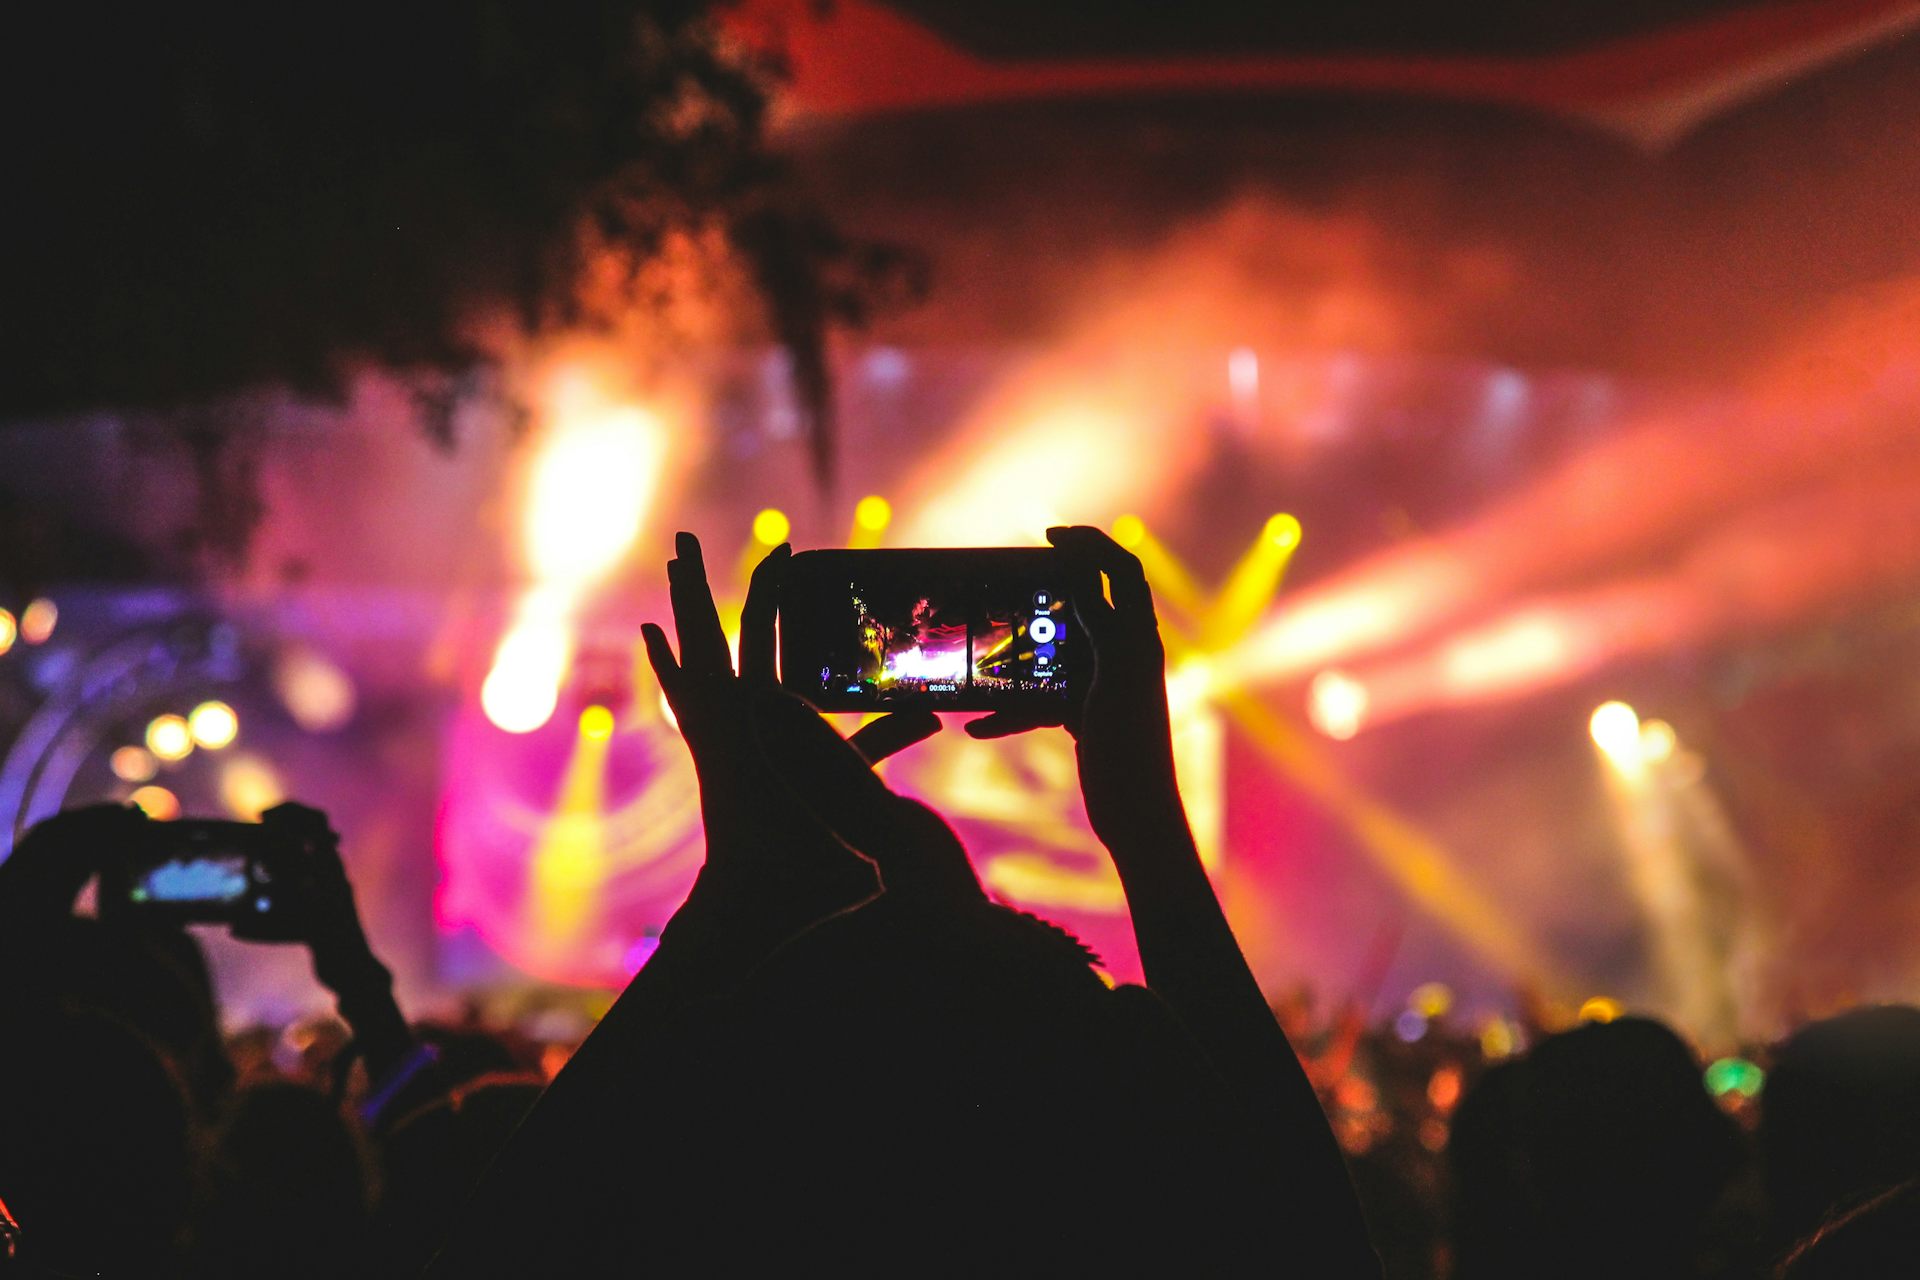 A person taking a photo on their mobile phone at a festival